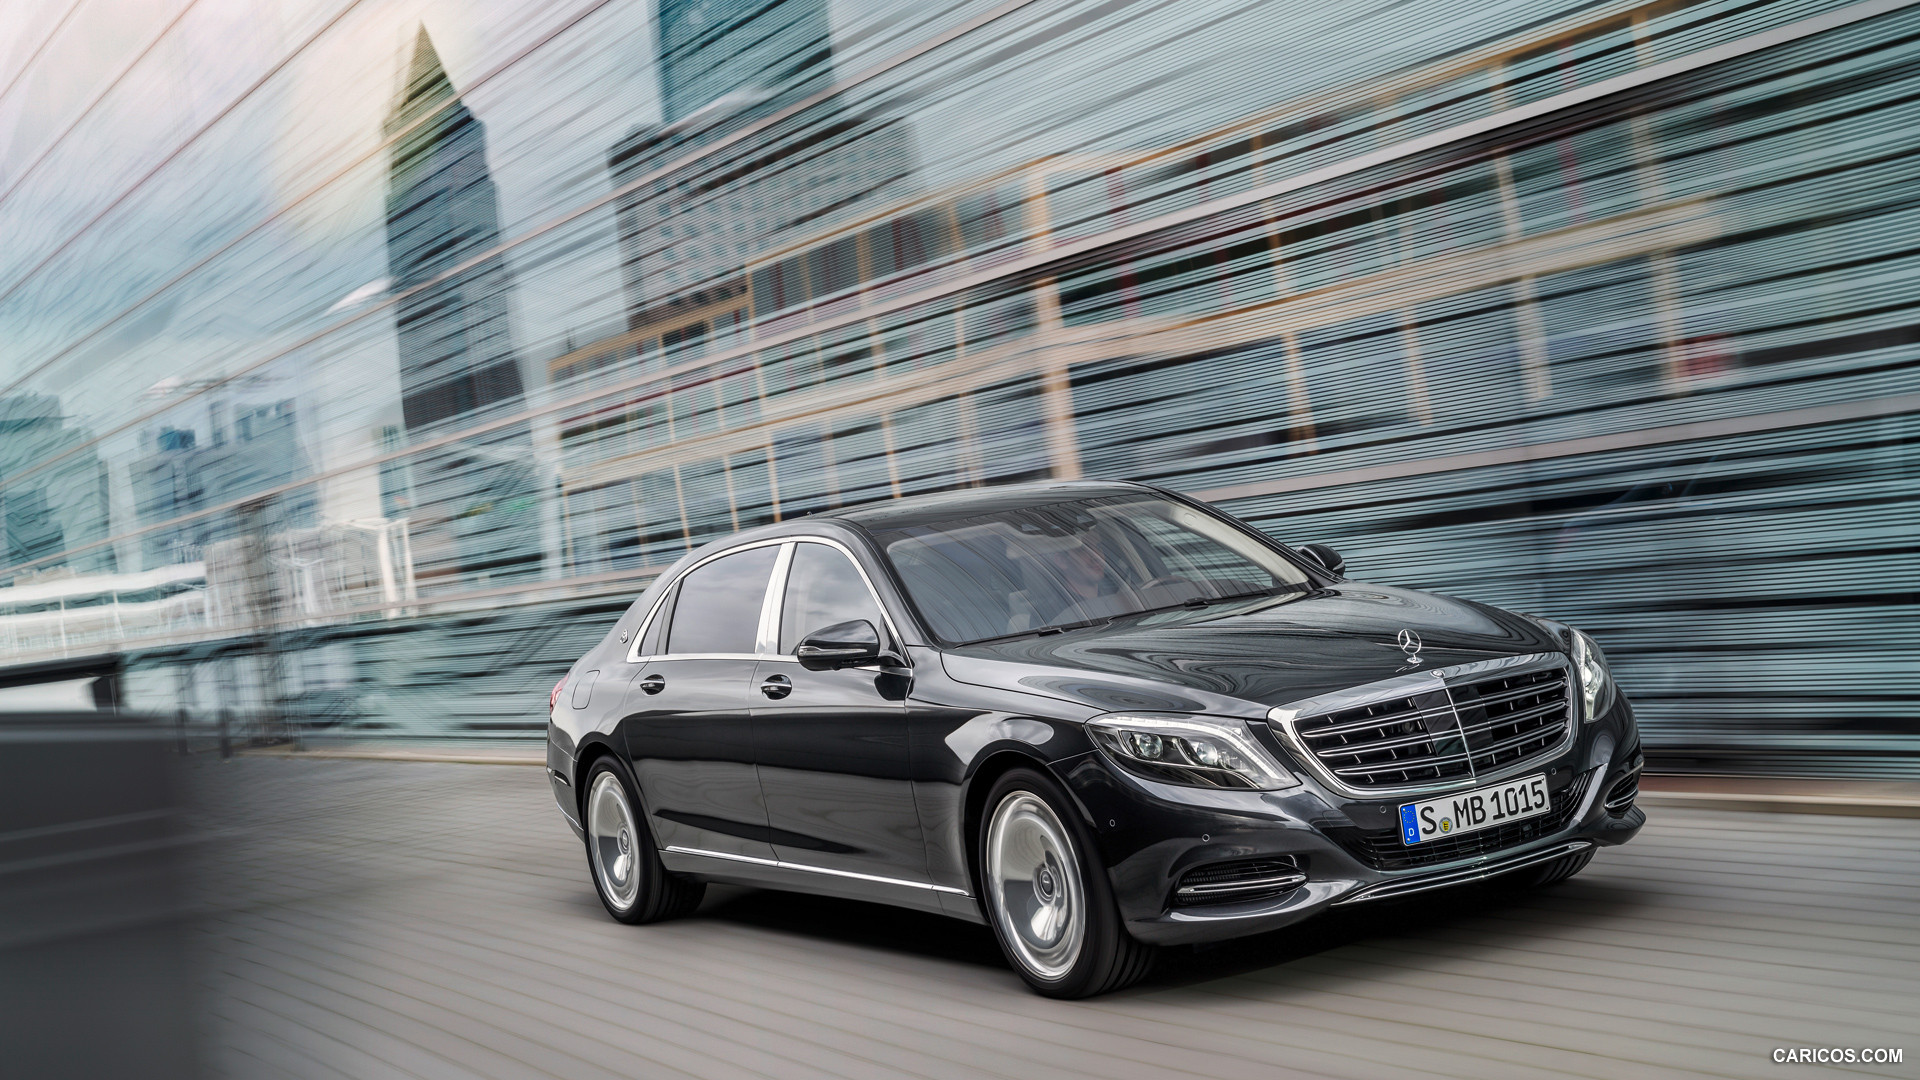 2016 Mercedes-Maybach S-Class S600 - Front, #1 of 225